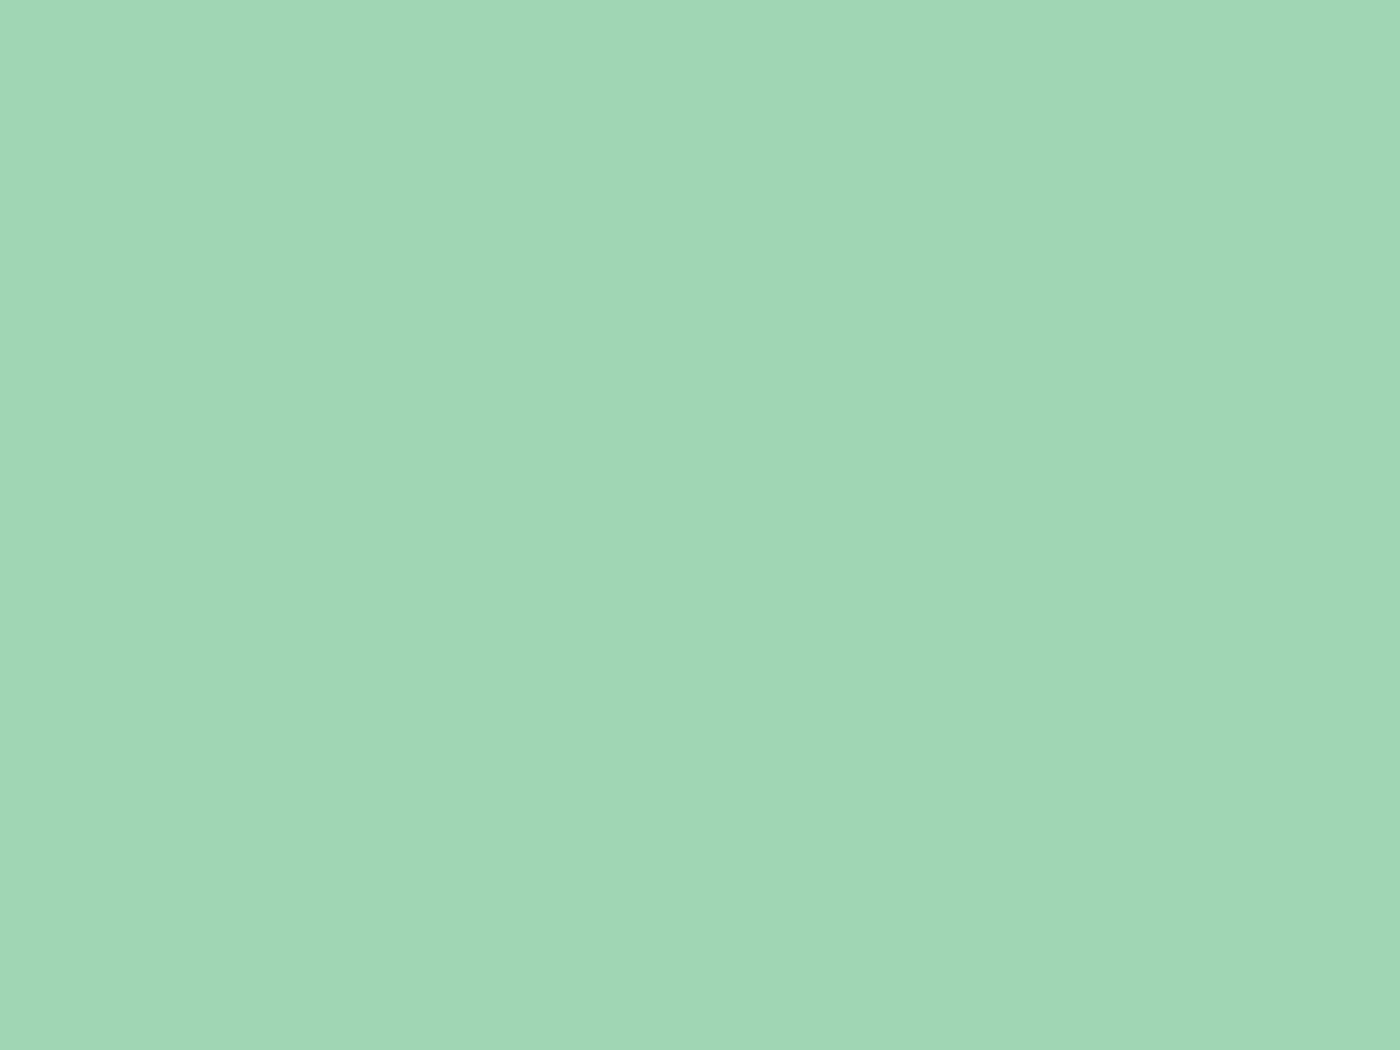 1400x1050 Turquoise Green Solid Color Background